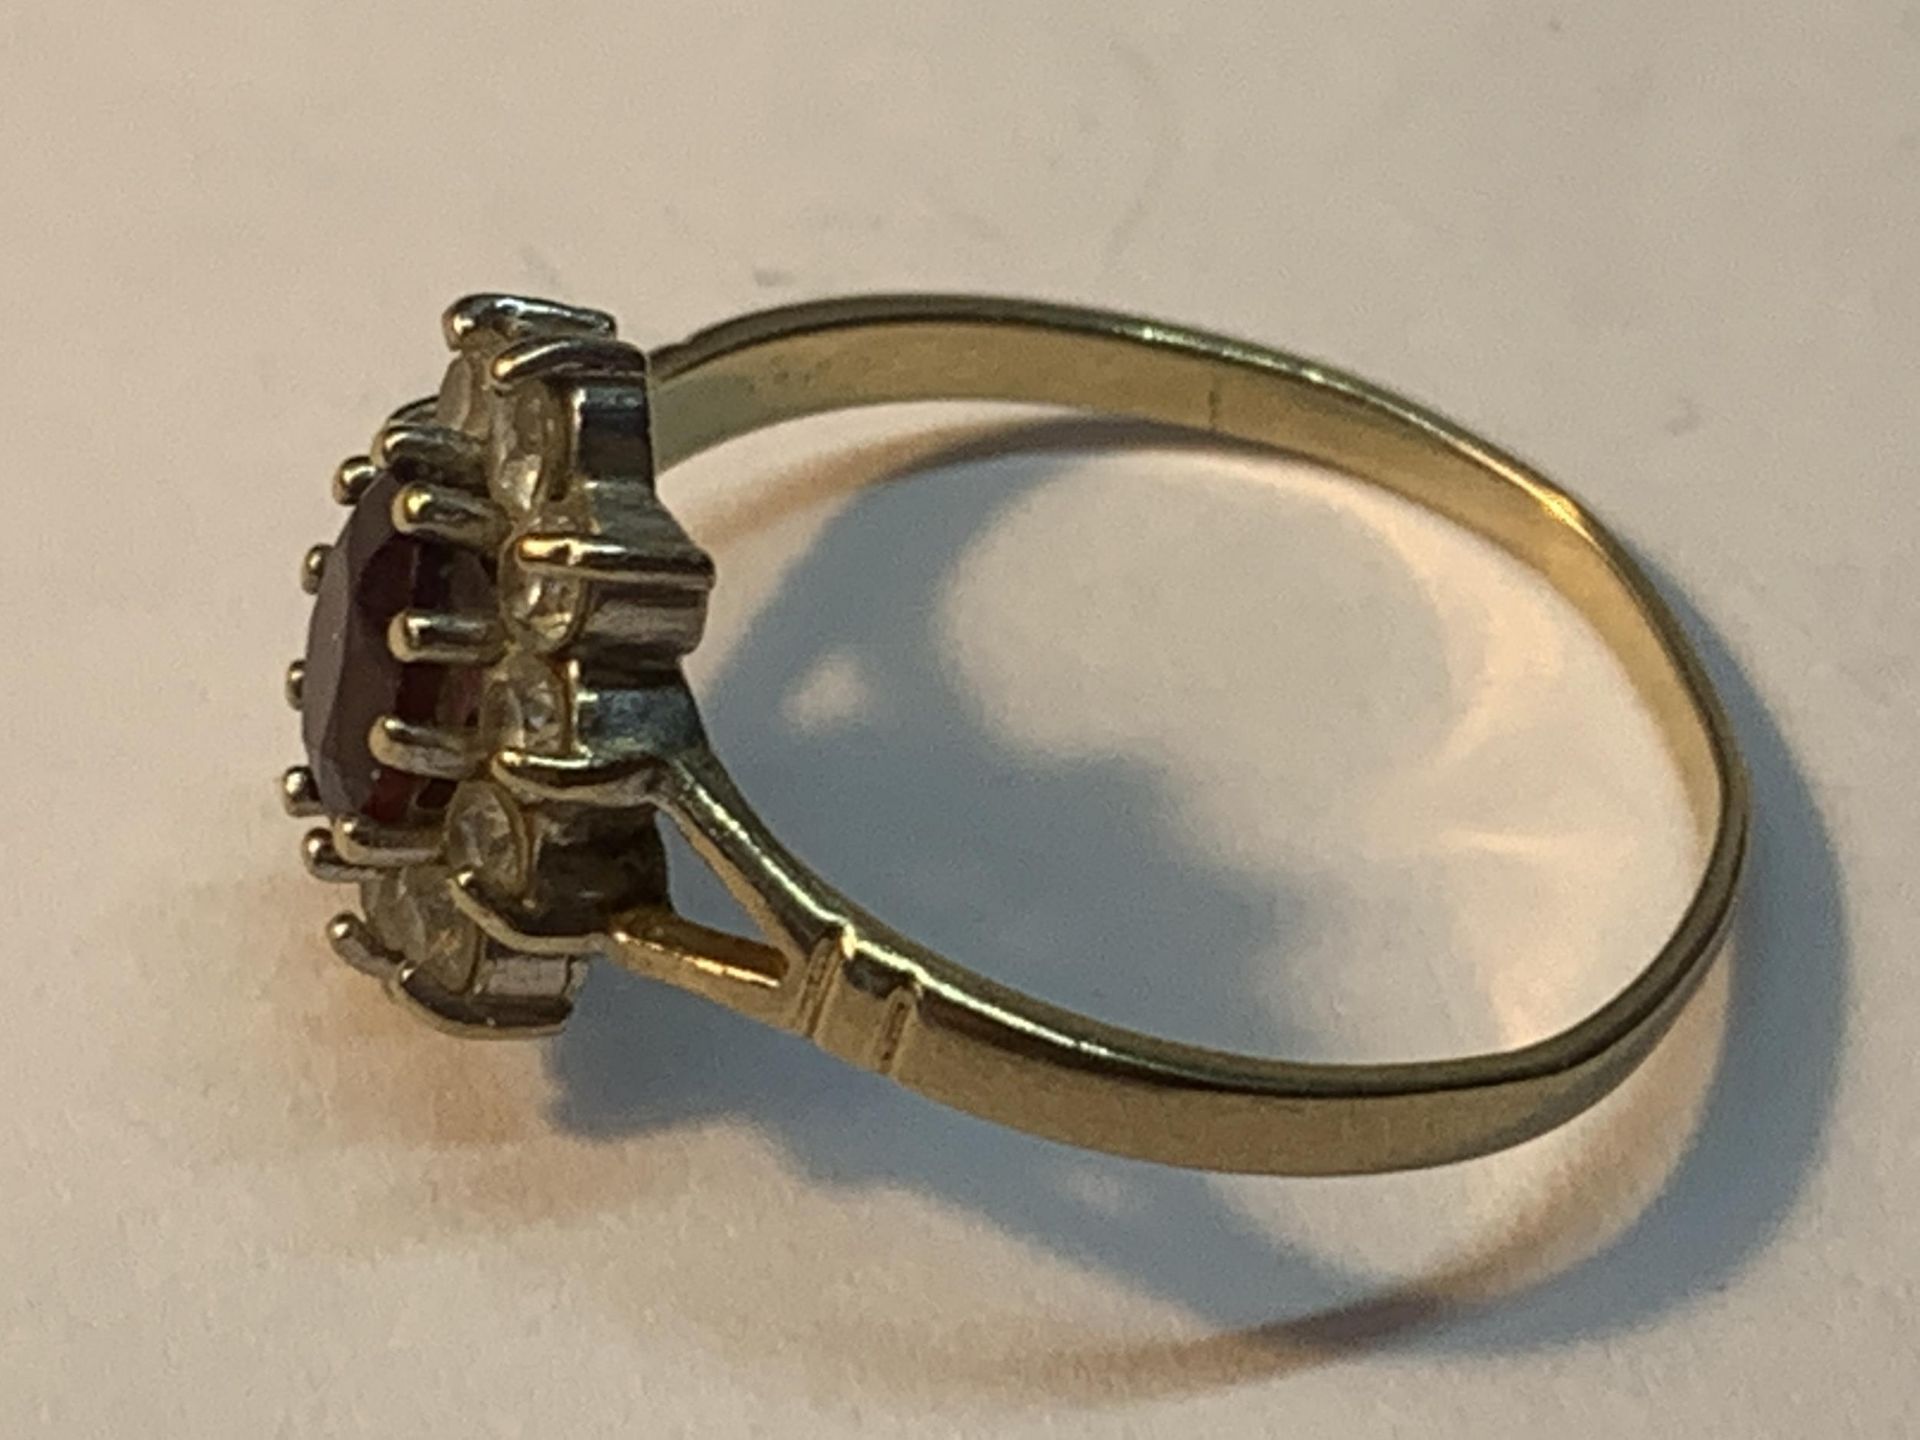 A 9 CARAT GOLD RING WITH A CENTRE GARNET SURROUNDED BY CUBIC ZIRCONIAS SIZE O/P - Image 2 of 3